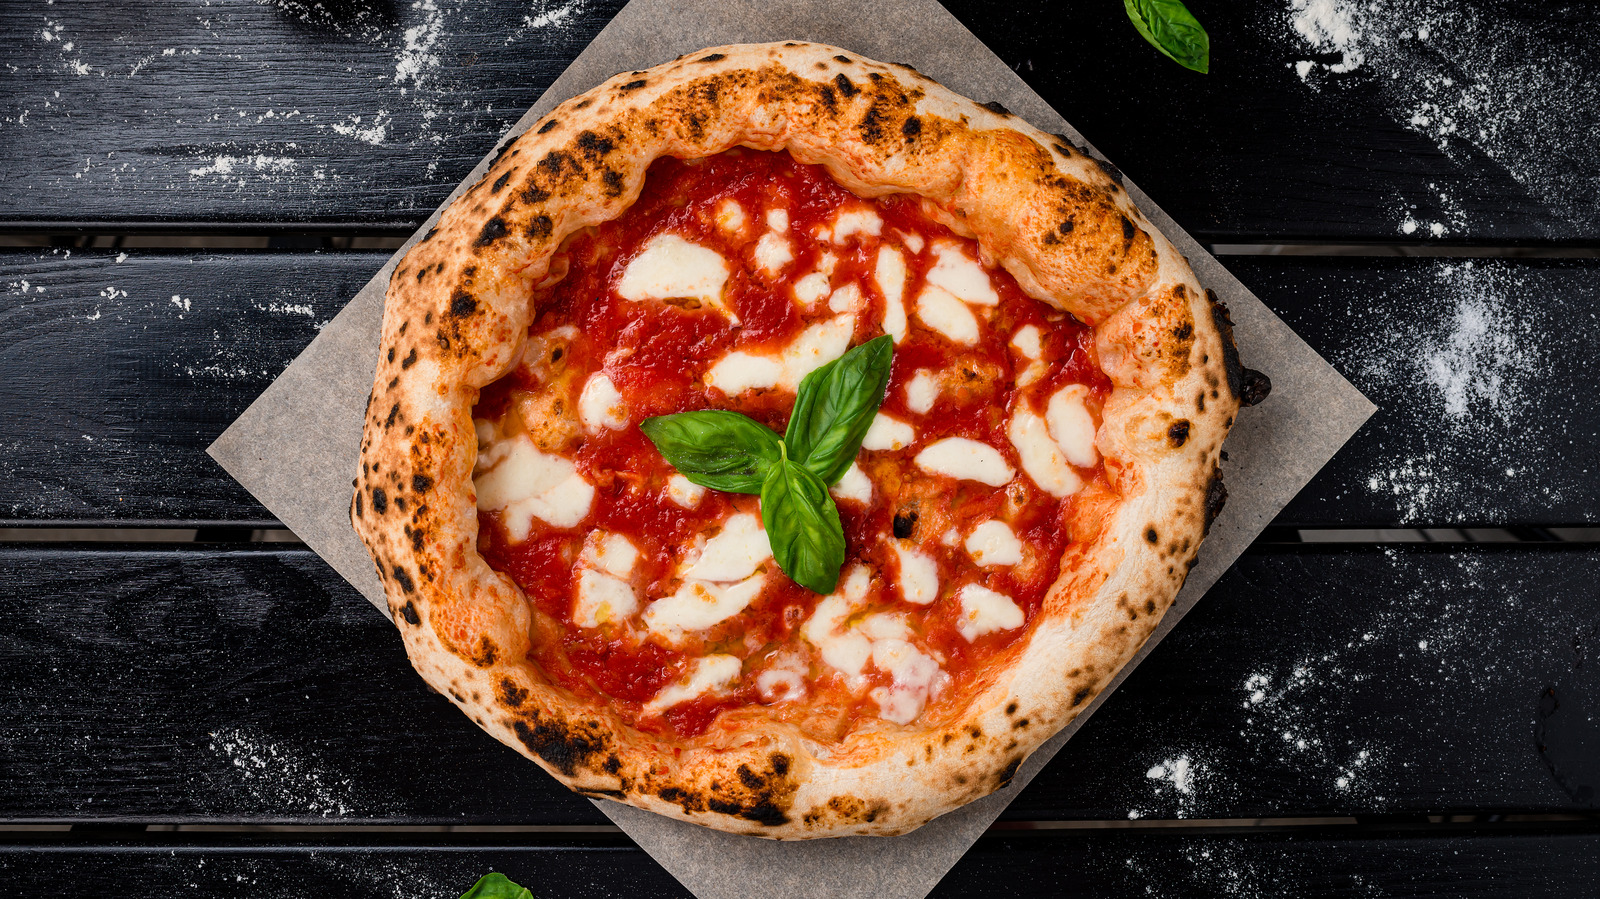 https://www.thedailymeal.com/img/gallery/the-secret-ingredient-that-makes-homemade-pizza-sauce-restaurant-worthy/l-intro-1697231447.jpg